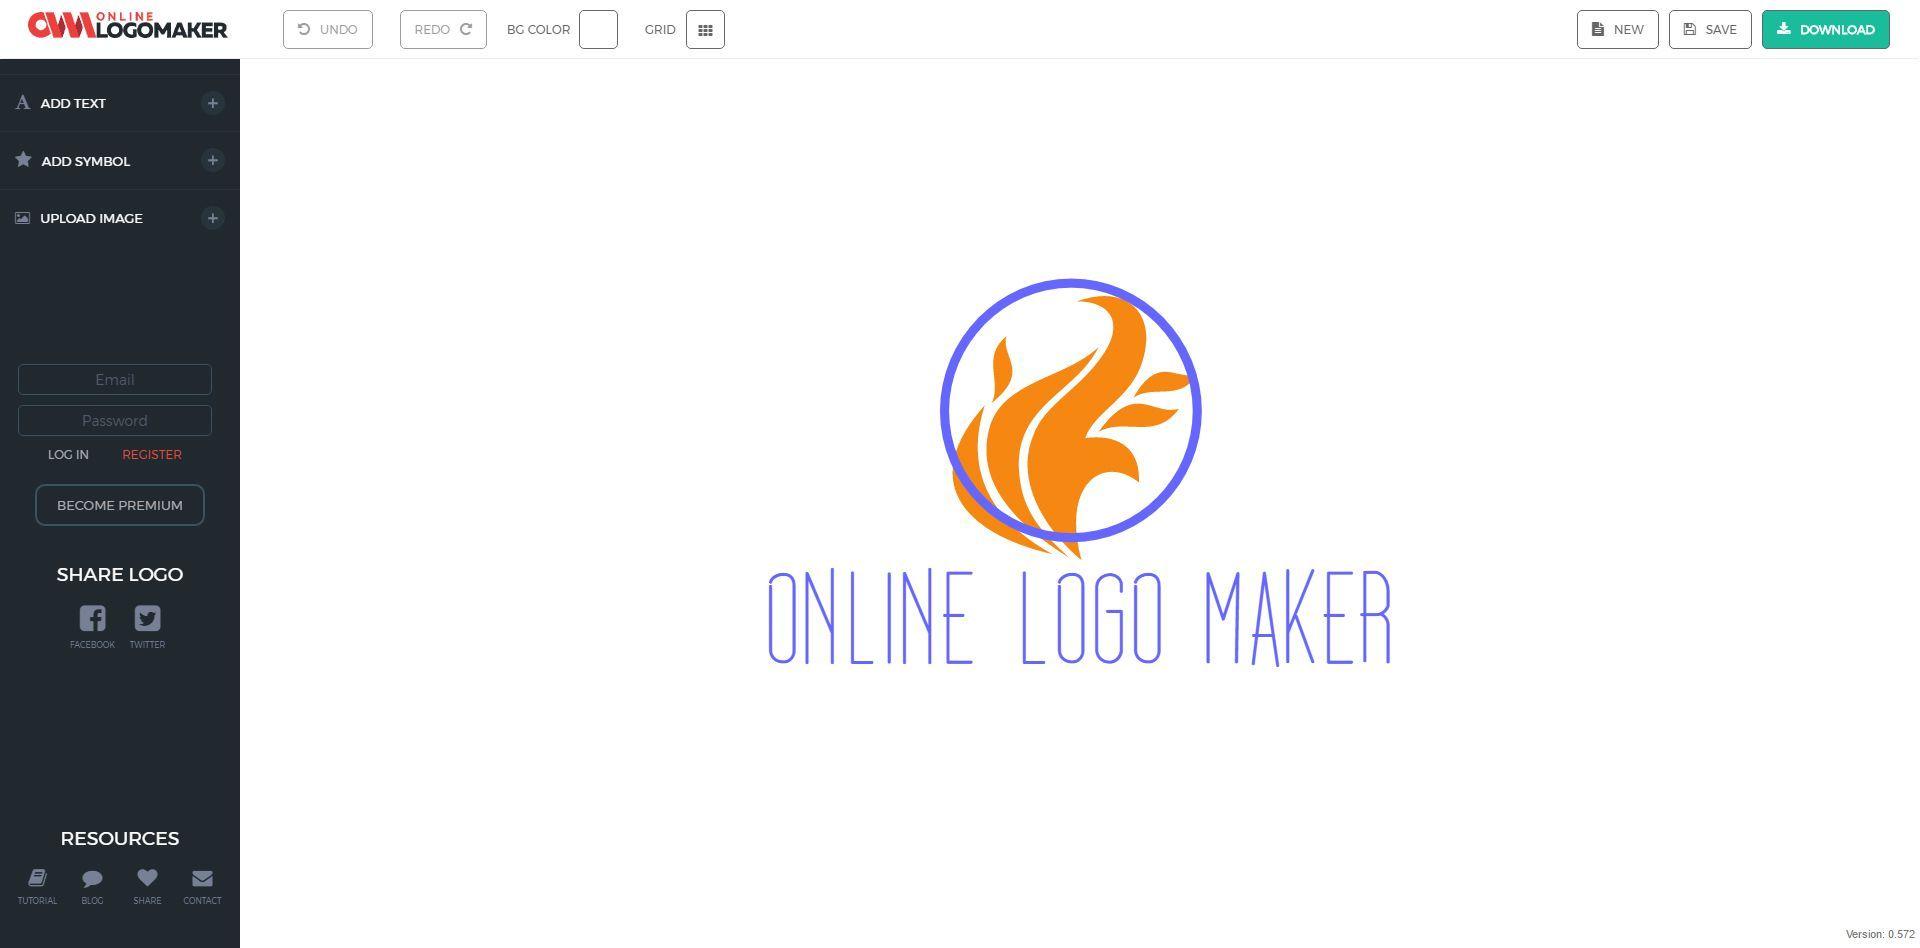 Lifewire Logo - Free Online Logo Makers You've Got to Try